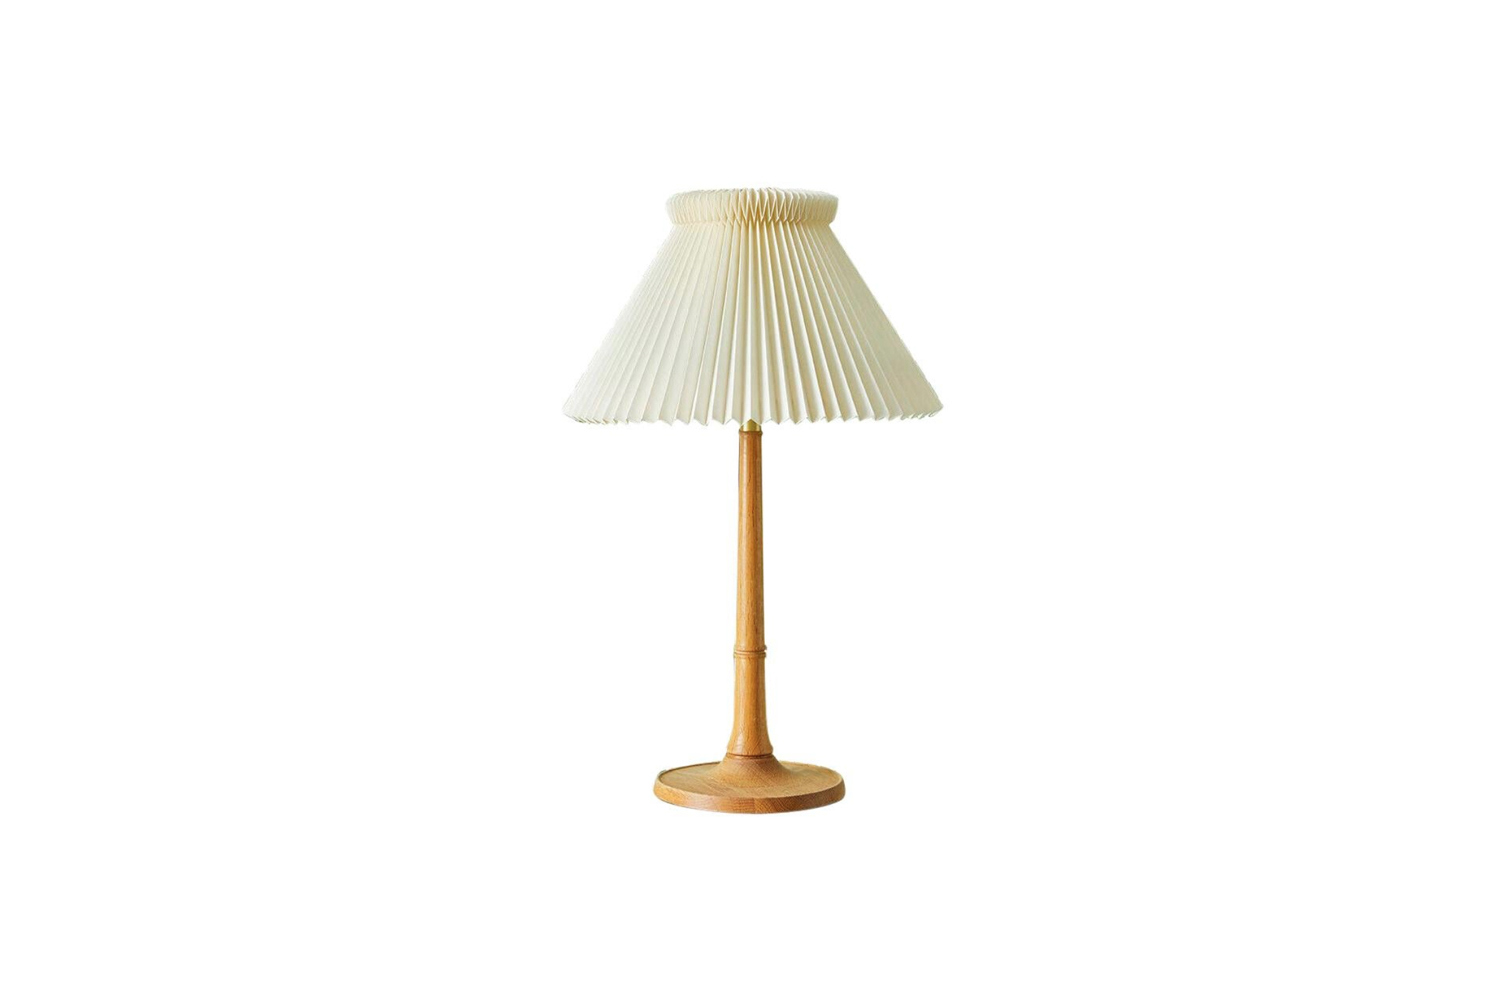 on the table is the vintage le klint oak table lamp, available for $1,995.15 19